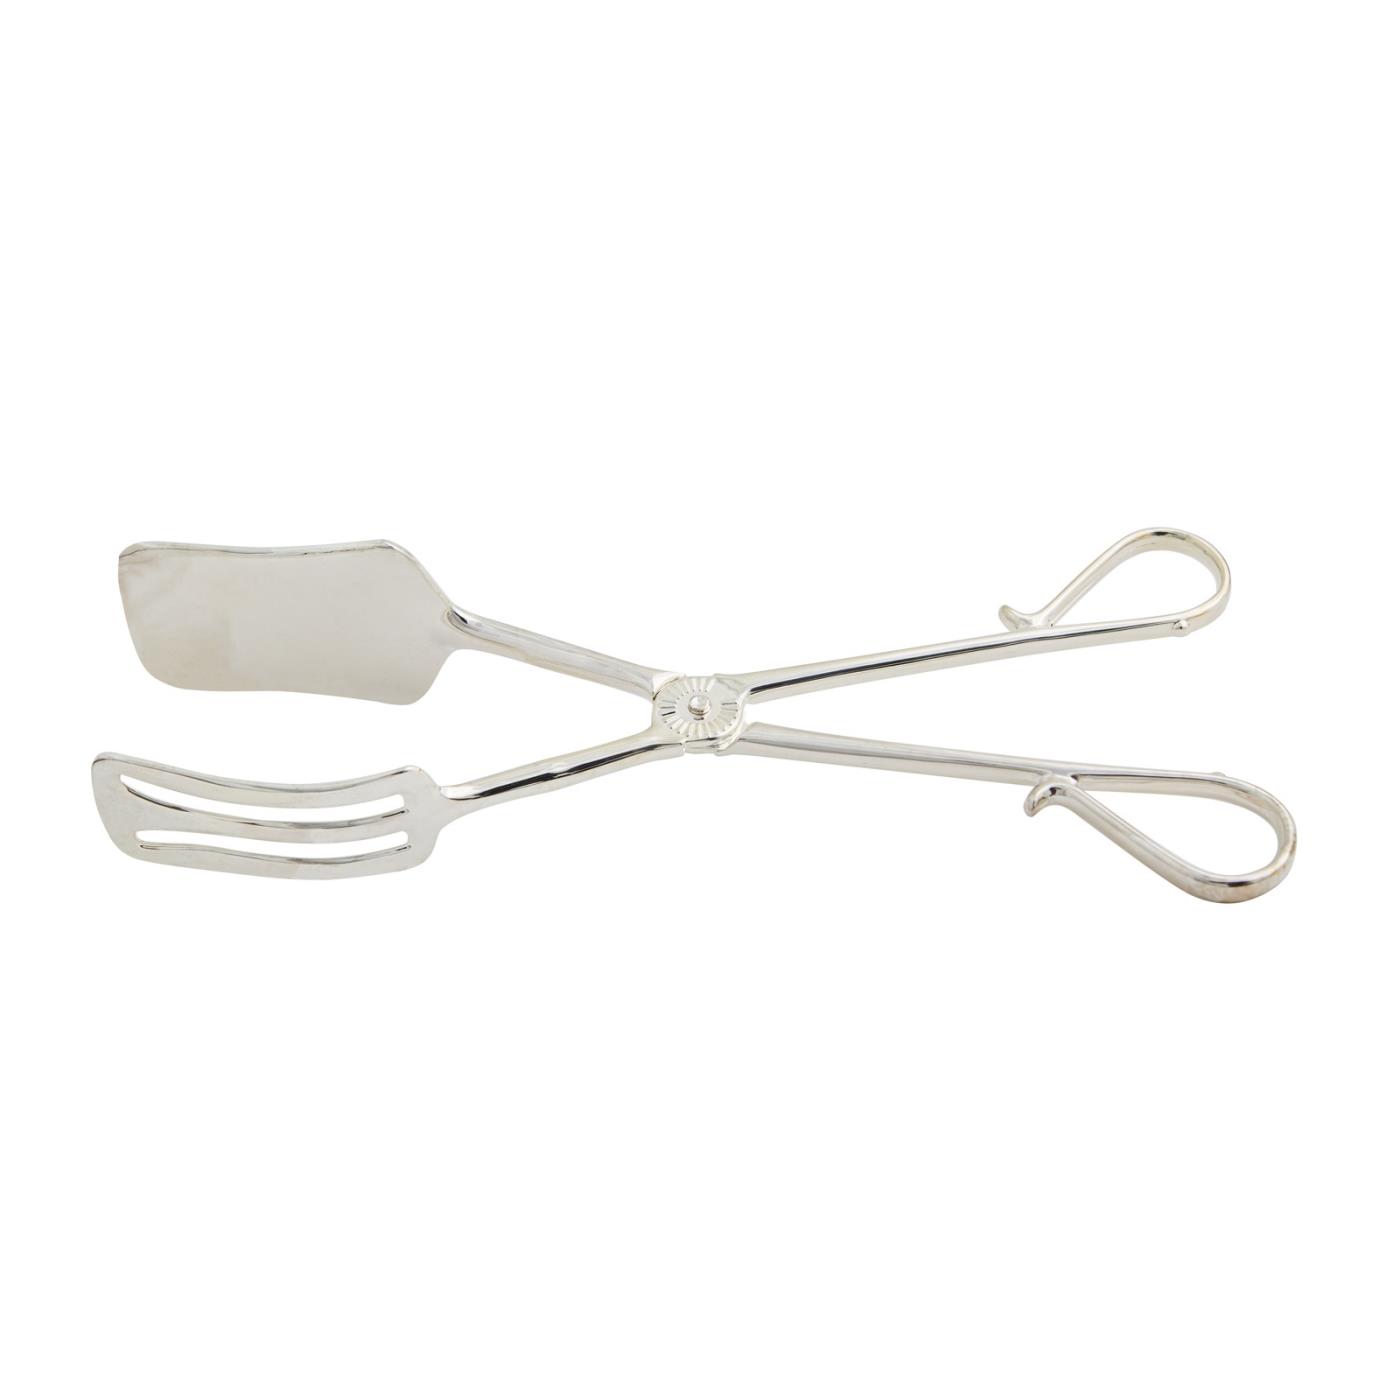 Silver Pastry Tongs